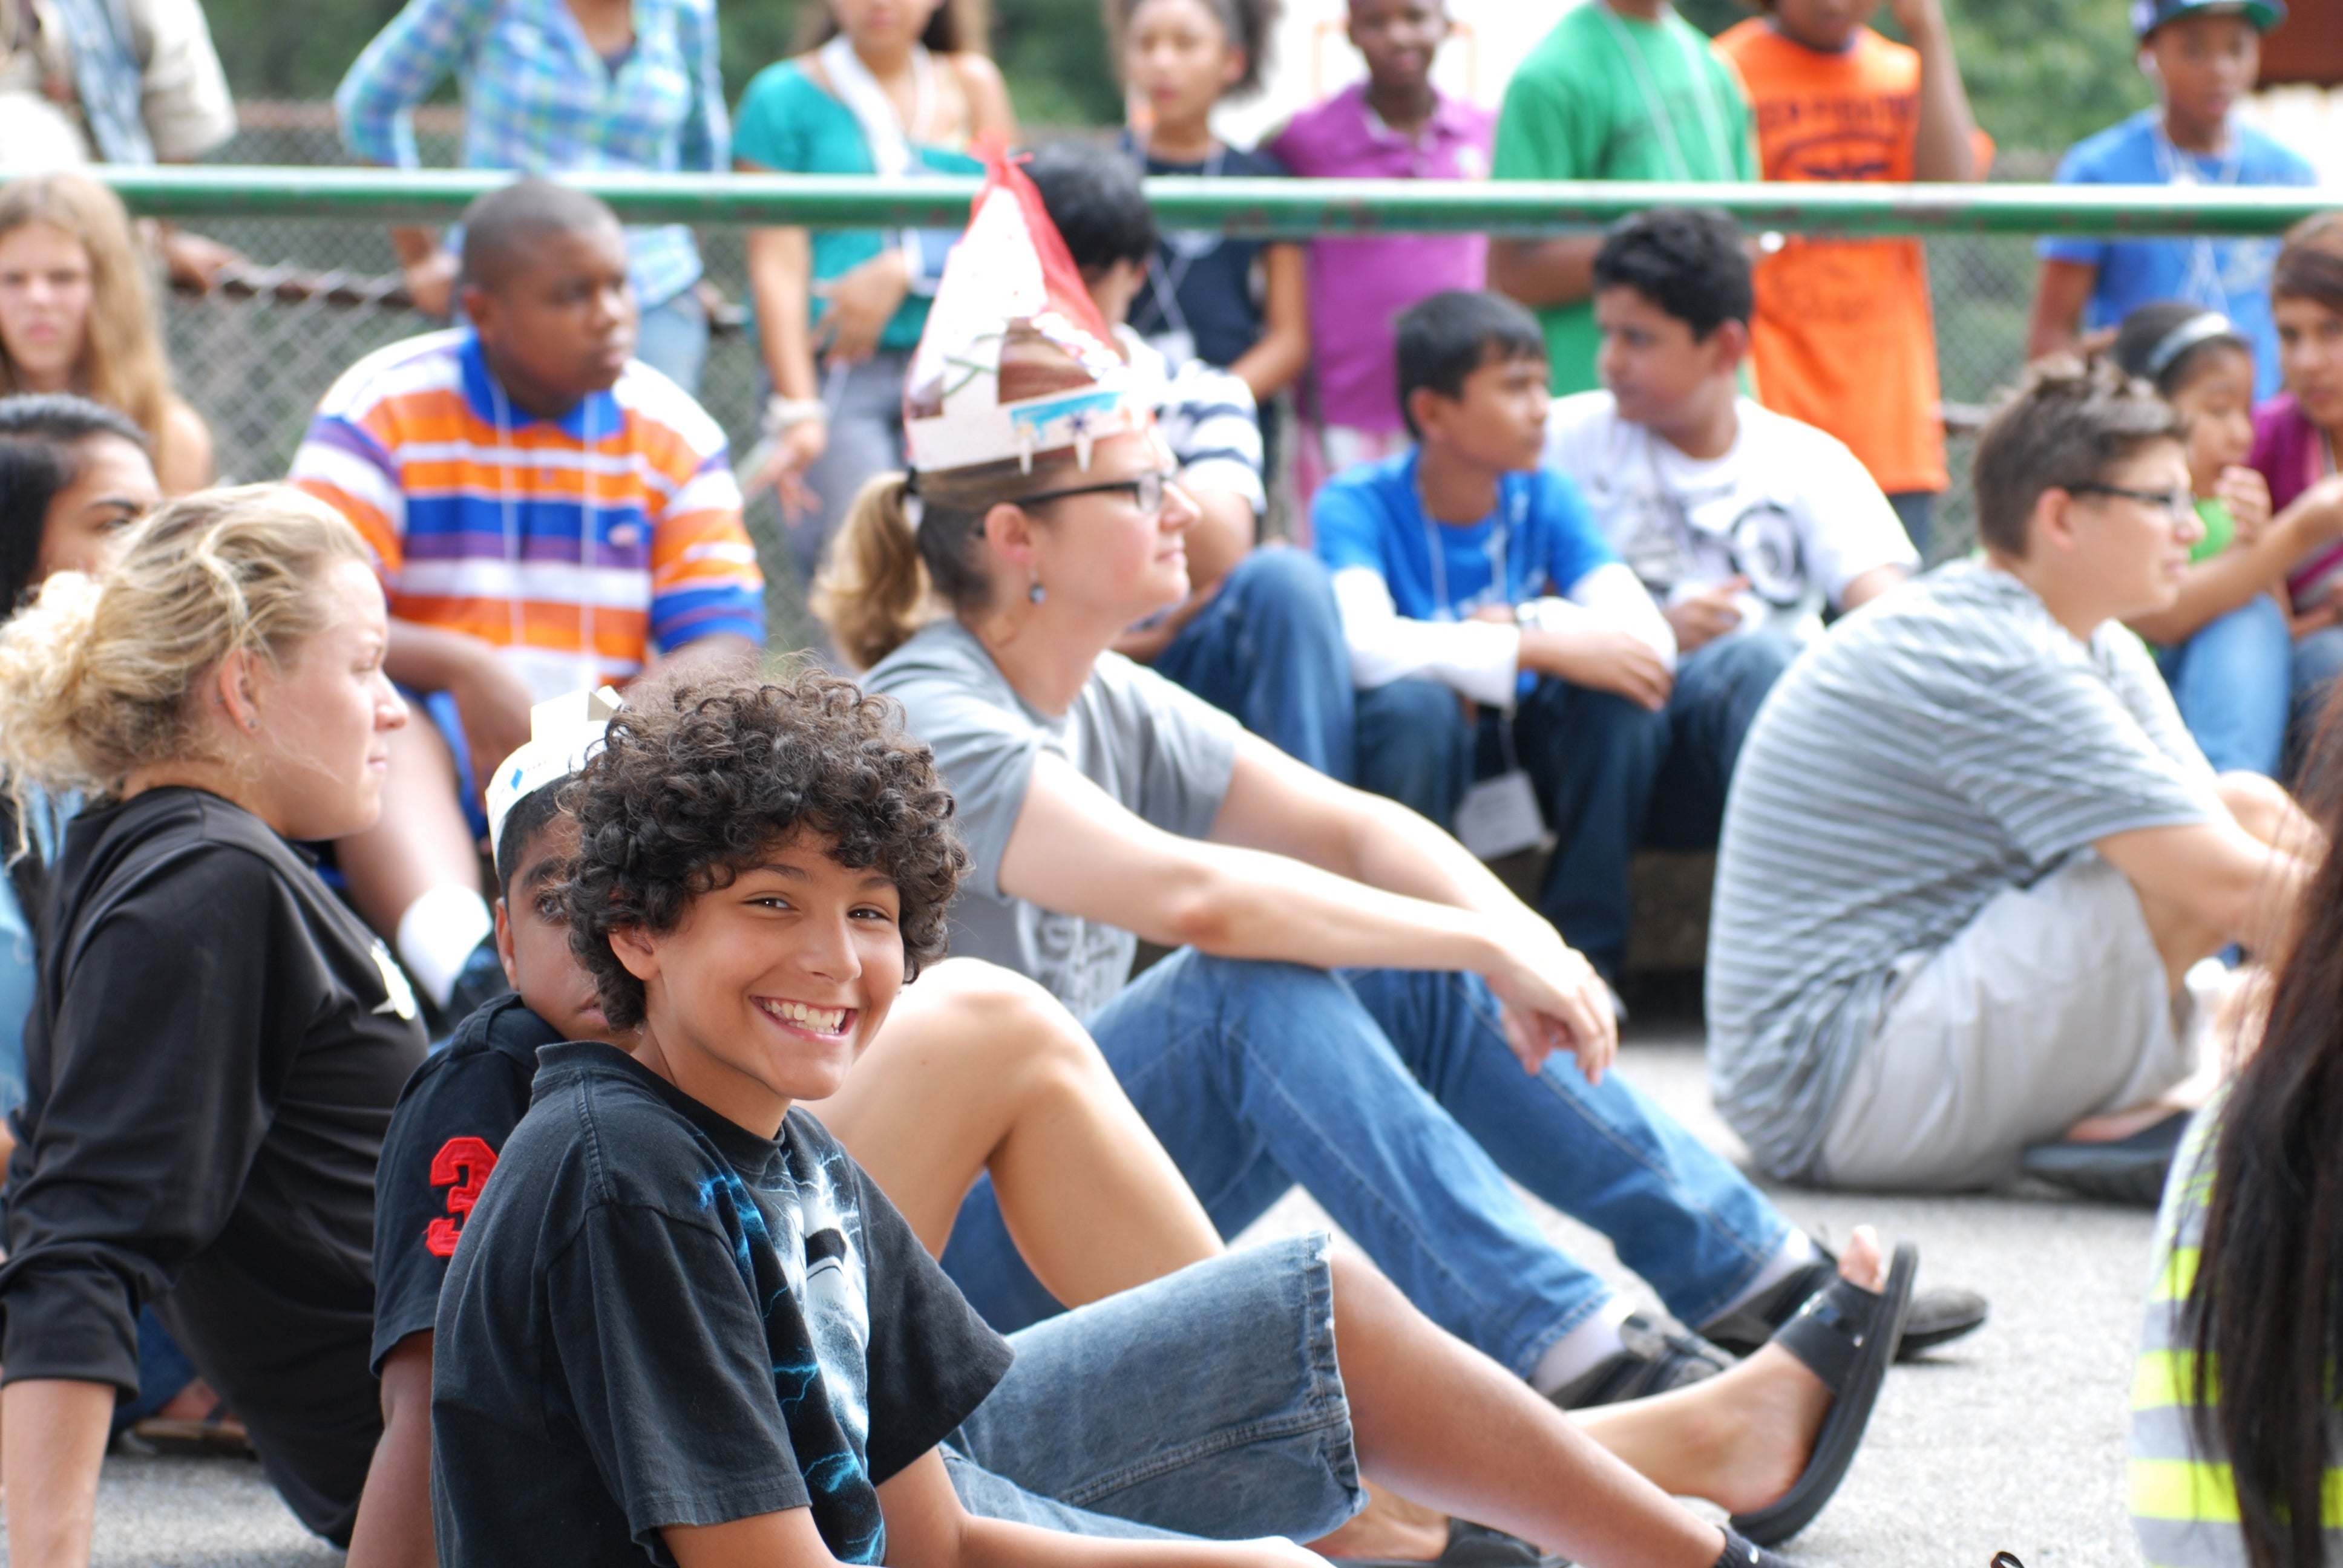 A boy smiles at the camera as children watch a performance.